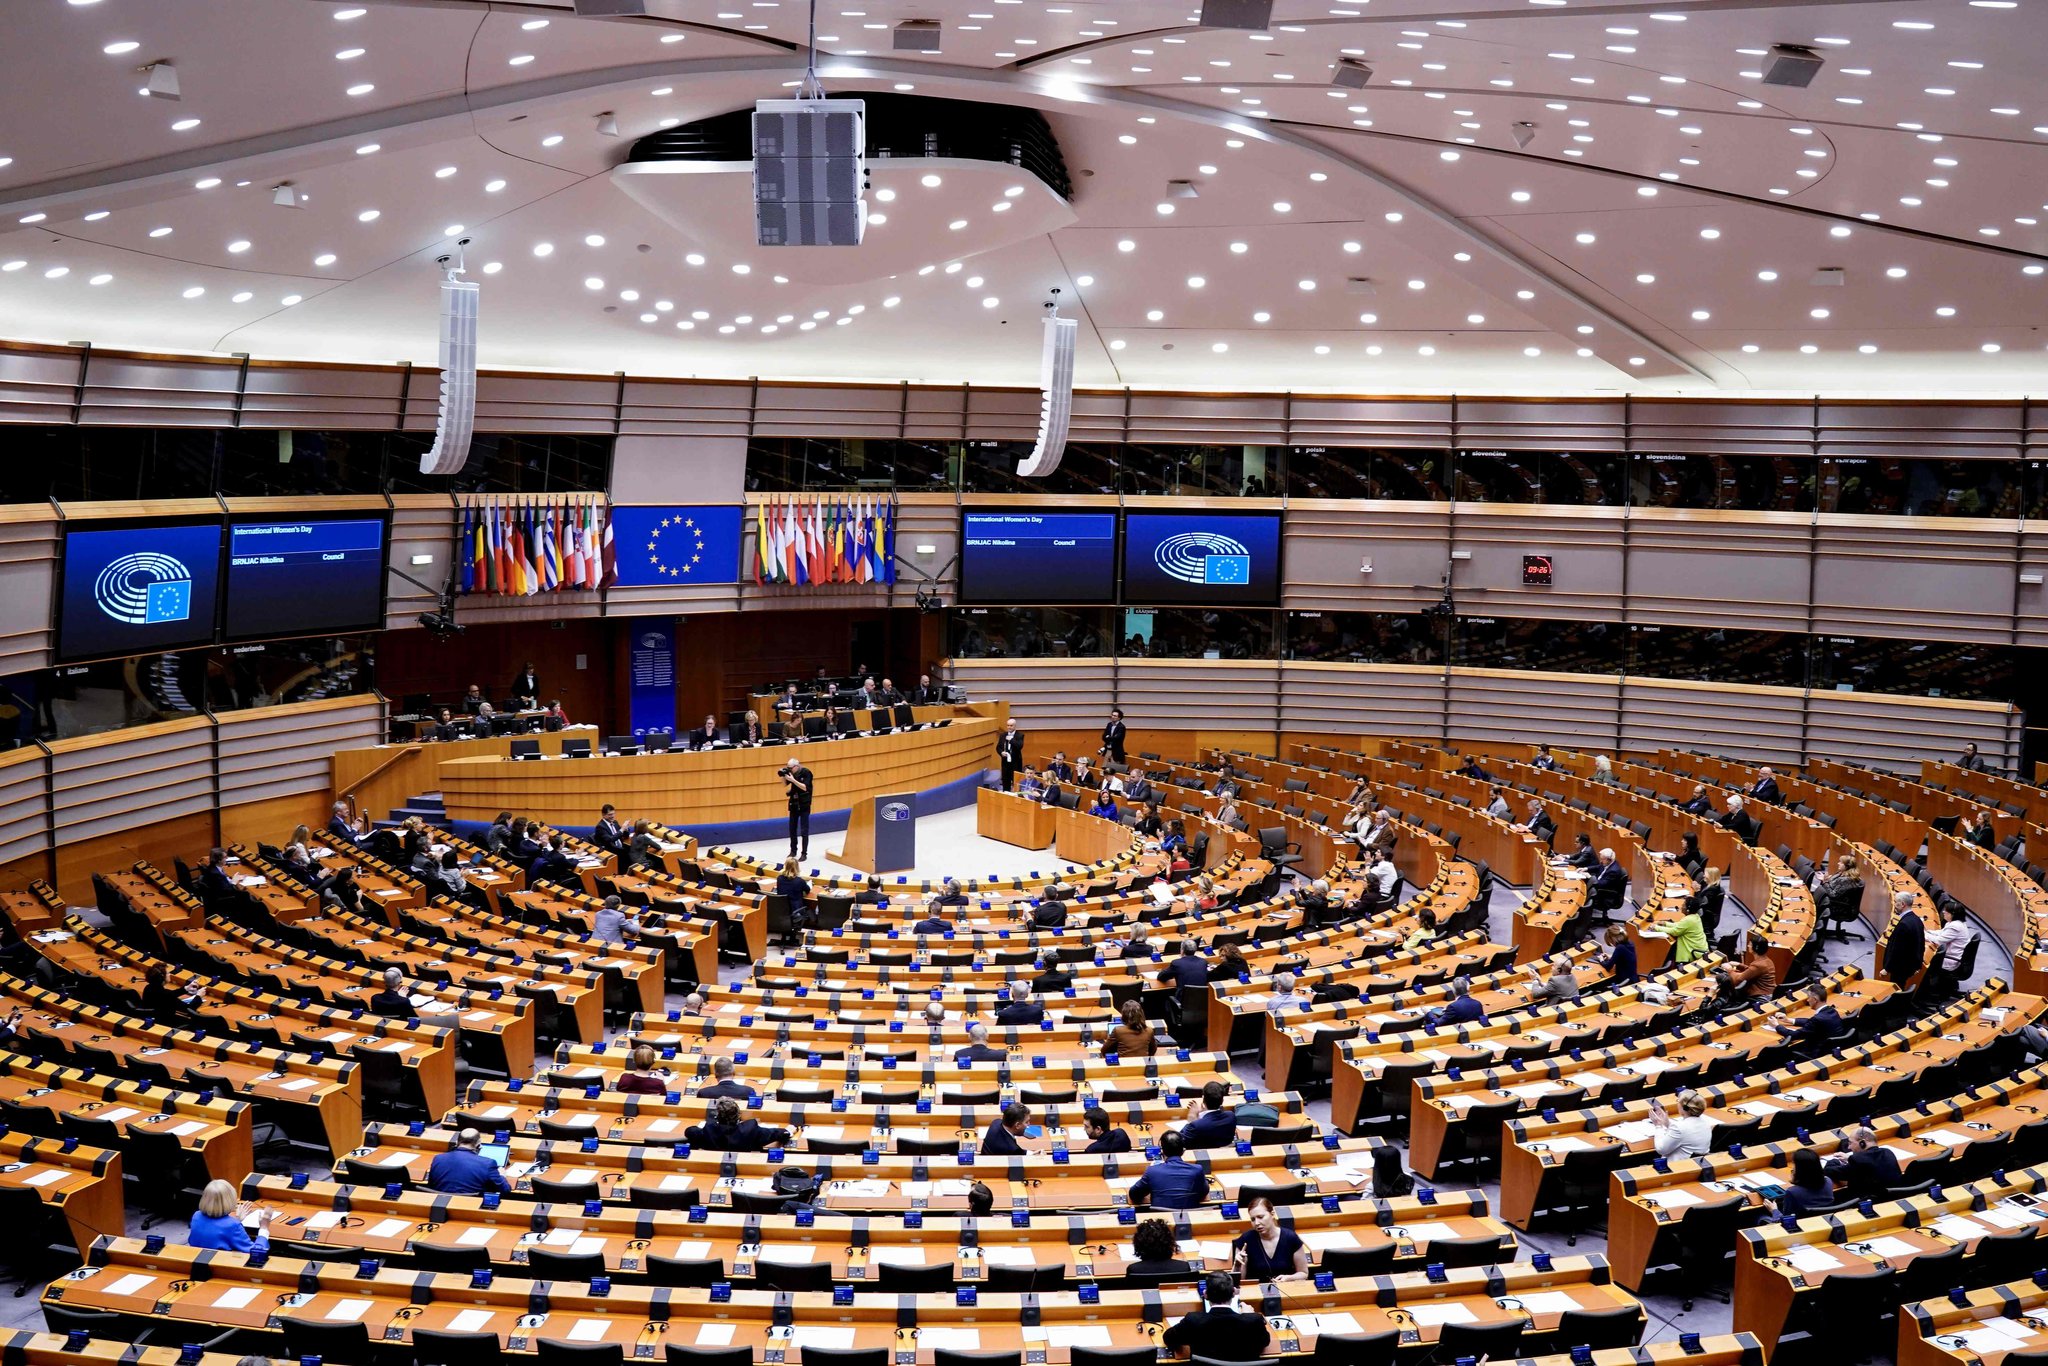 The European Parliament was nearly empty during a shortened session in Brussels [Getty]